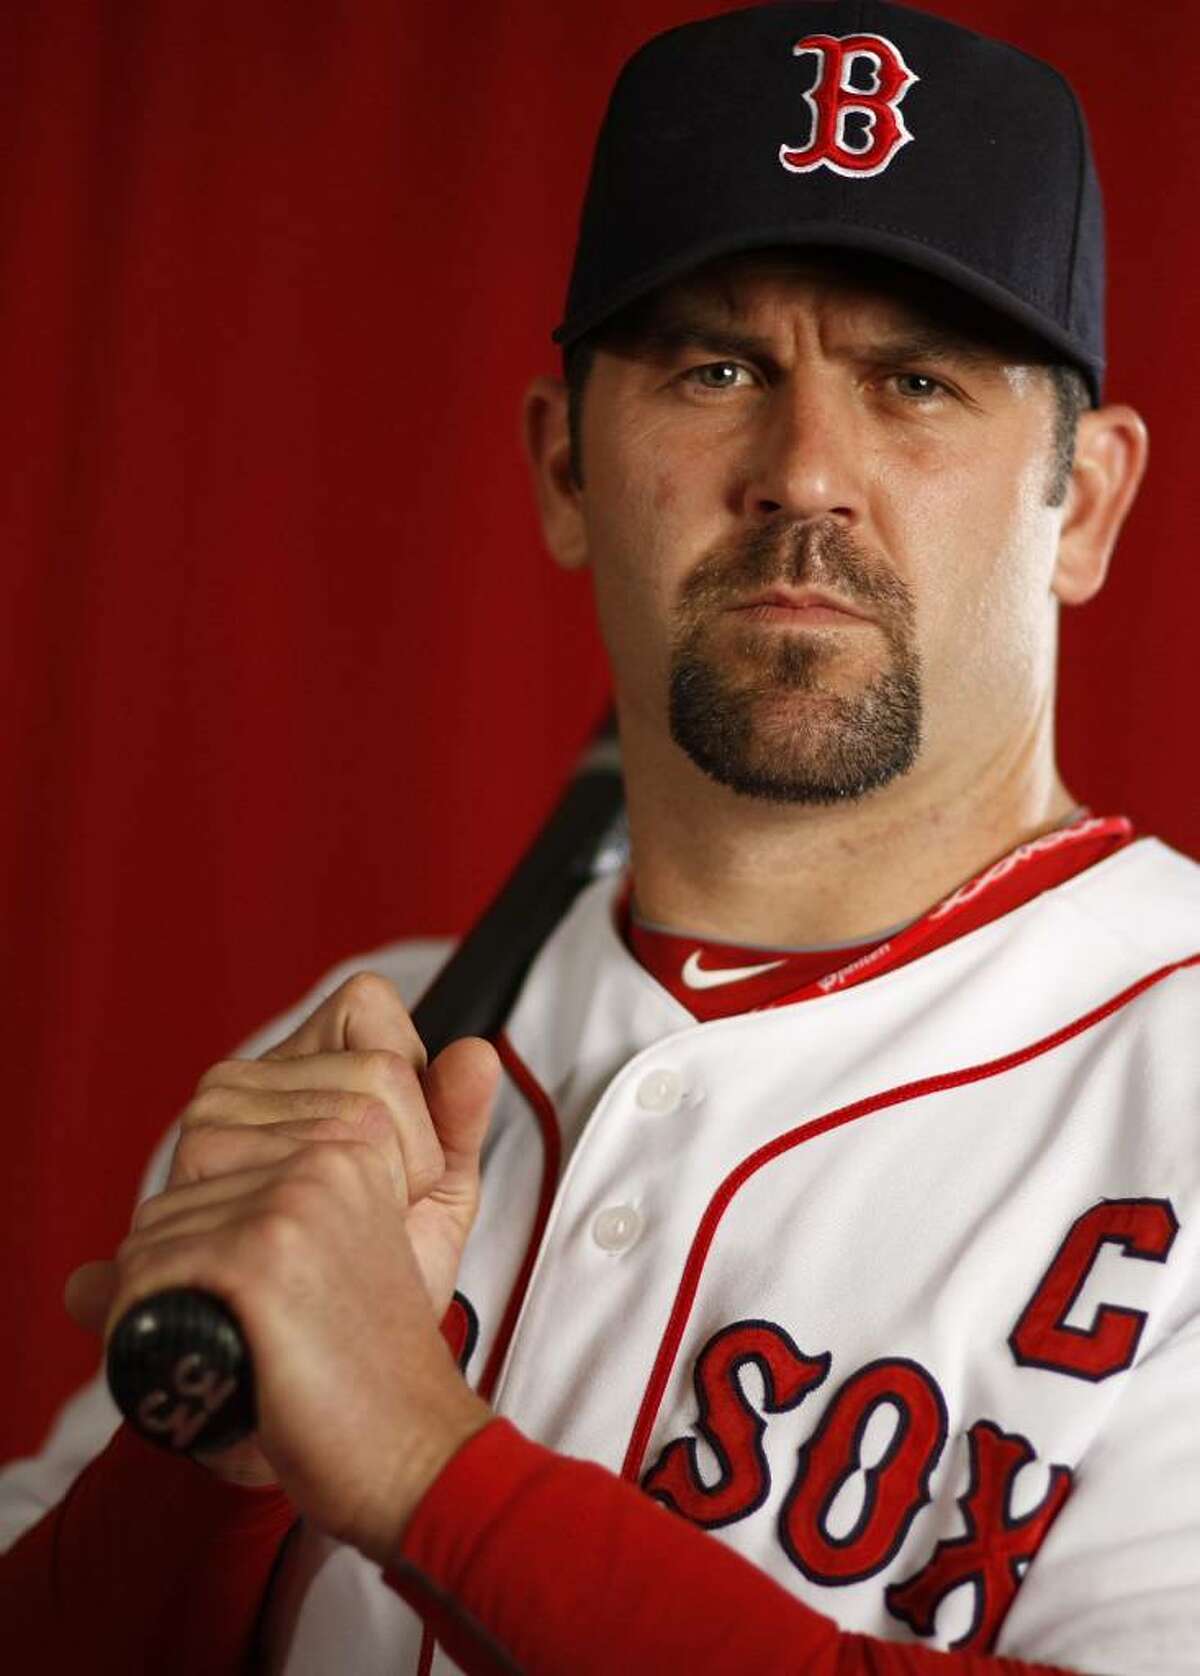 FT. MYERS, FL - FEBRUARY 28: Jason Varitek #33 of the Boston Red Sox poses during photo day at the Boston Red Sox Spring Training practice facility on February 28, 2010 in Ft. Myers, Florida. (Photo by Gregory Shamus/Getty Images) *** Local Caption *** Jason Varitek